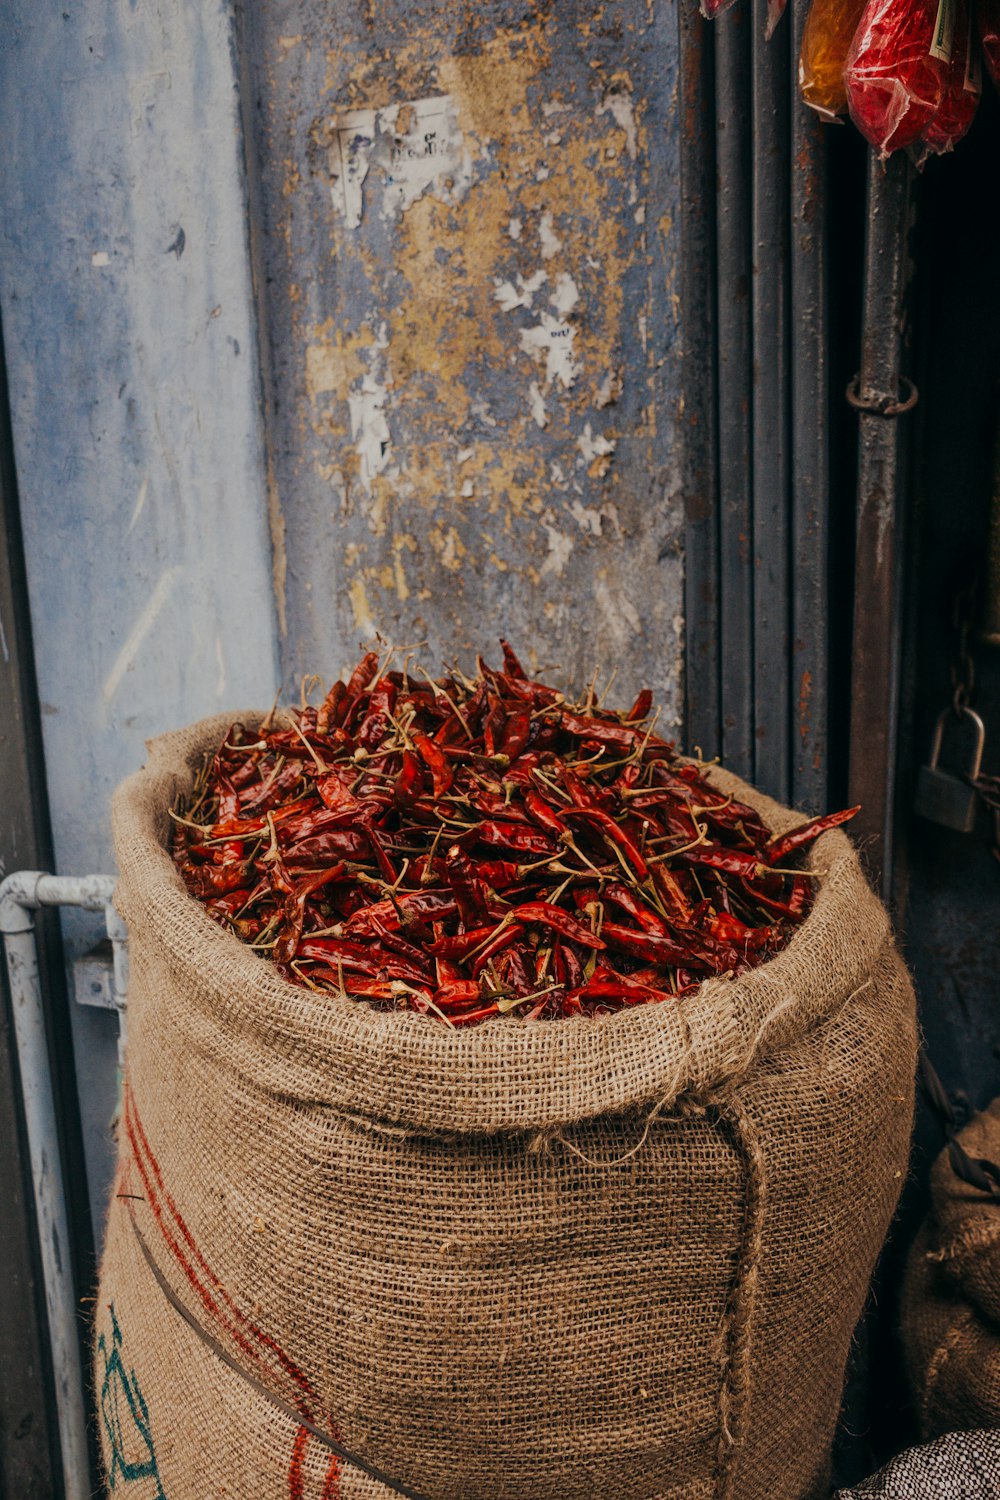 a sack full of dried red chili peppers